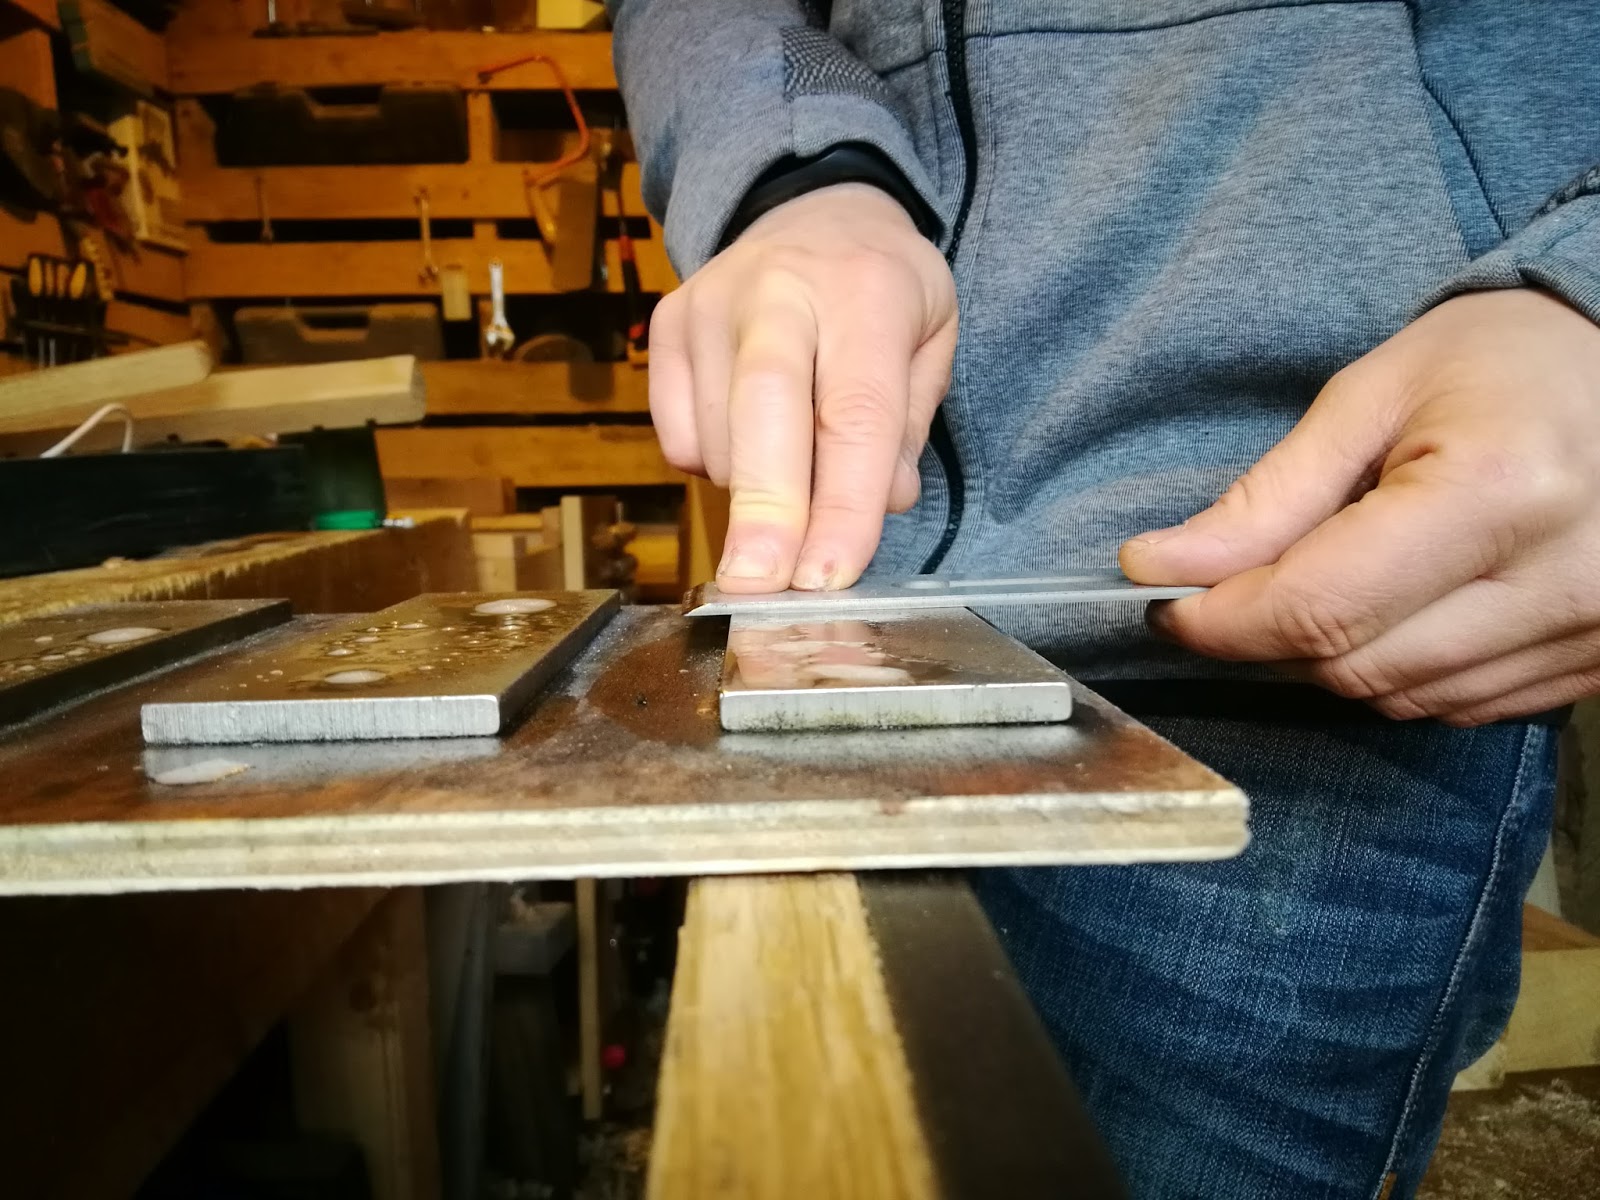 Buffing Compound for Chisels and Plane Irons - Paul Sellers' Blog